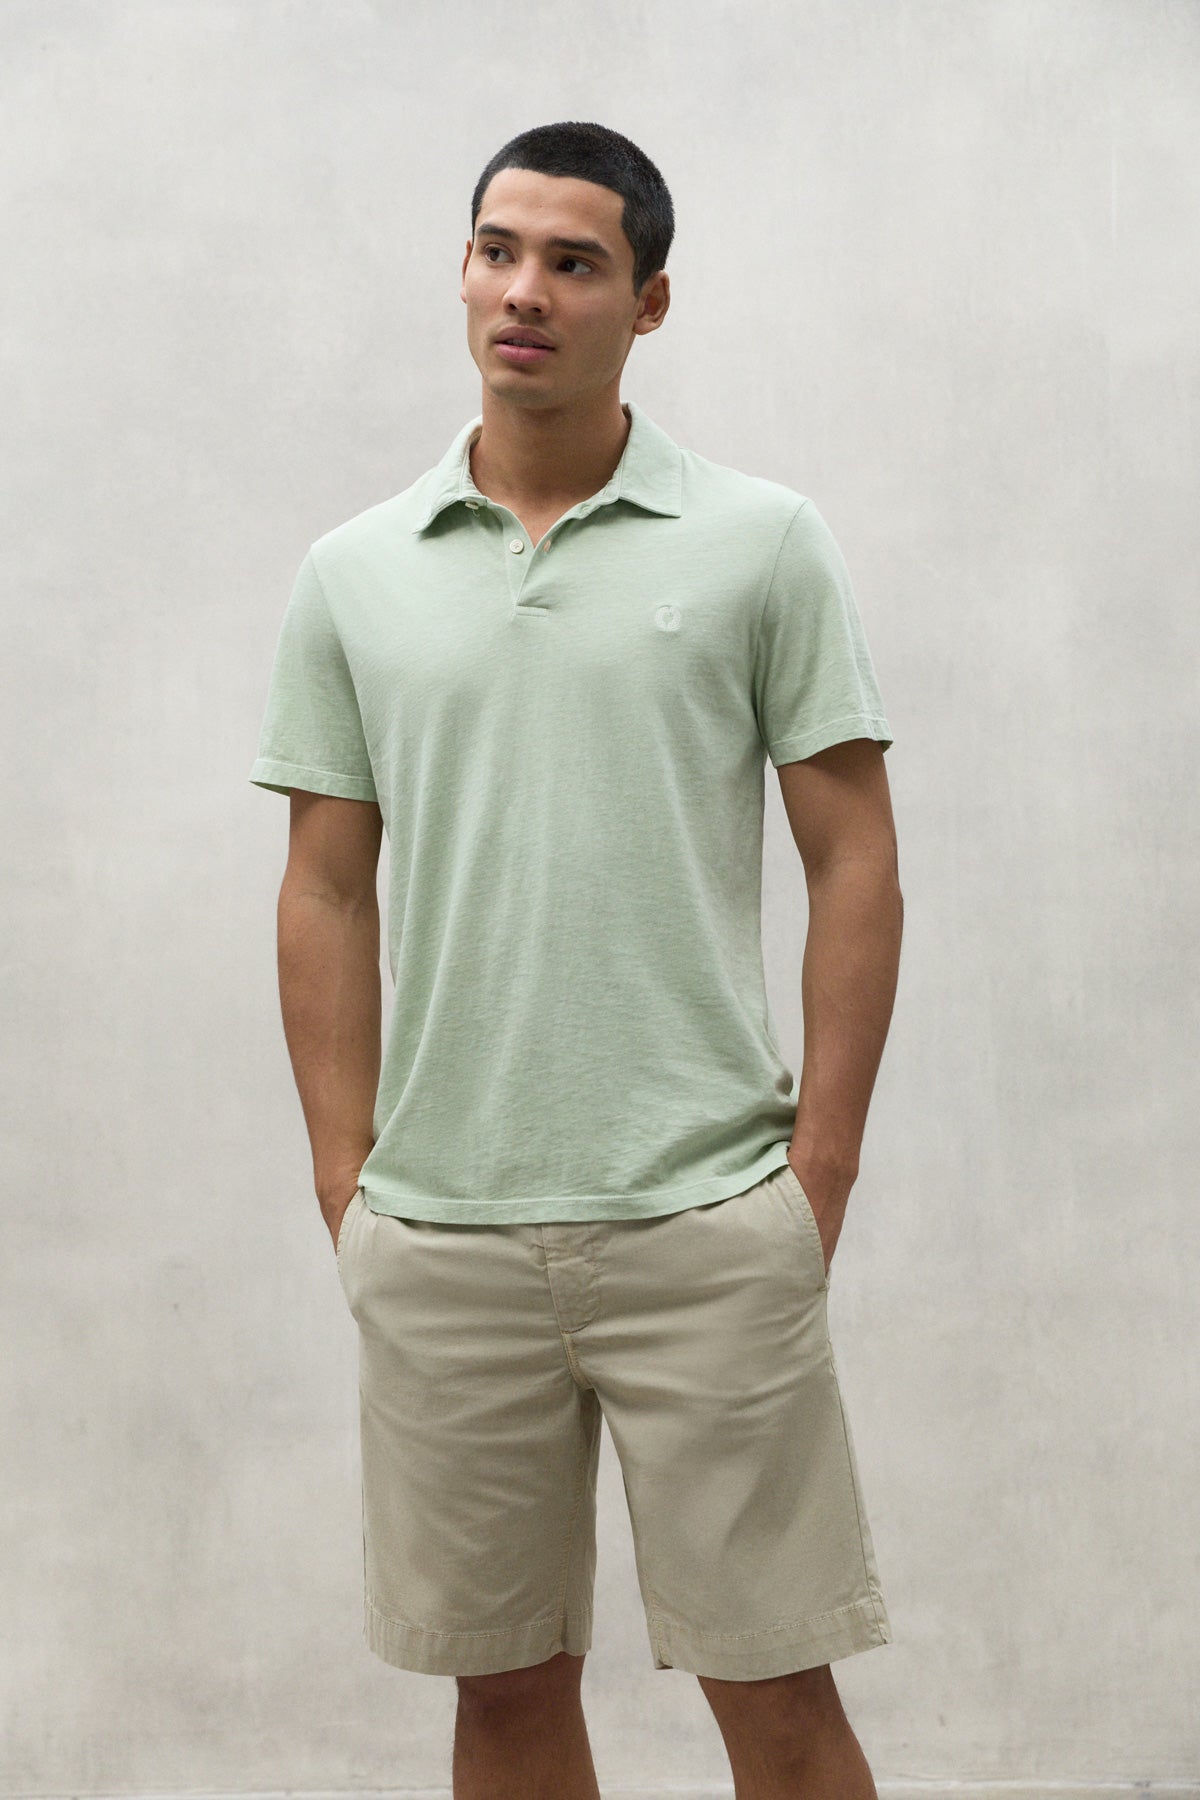 MINT THEO JERSEY POLO SHIRT